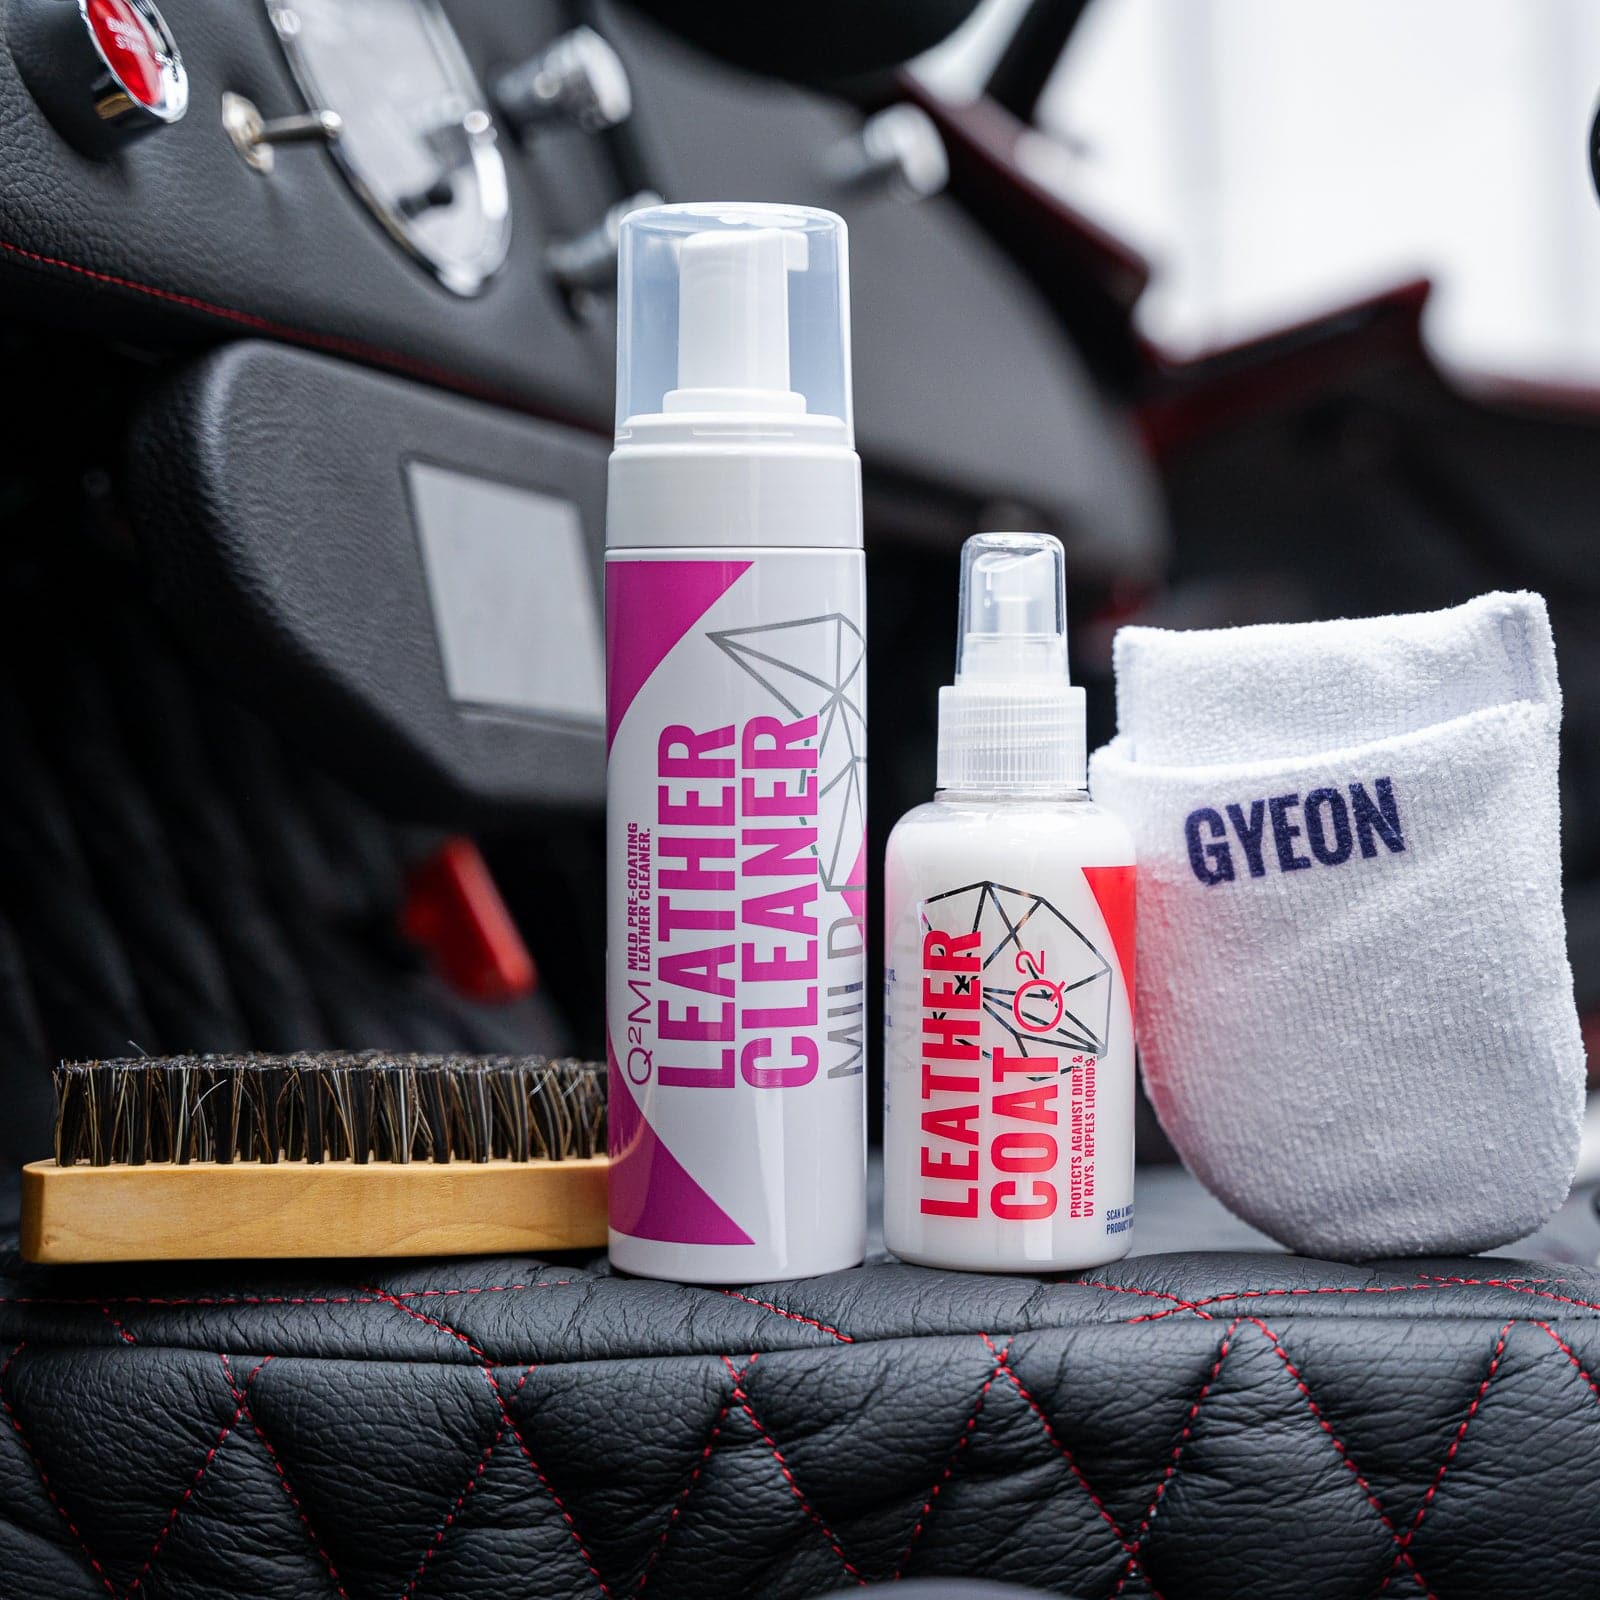 GYEON Q2M LEATHER CLEANER STRONG GYN-GY-1925. Professional